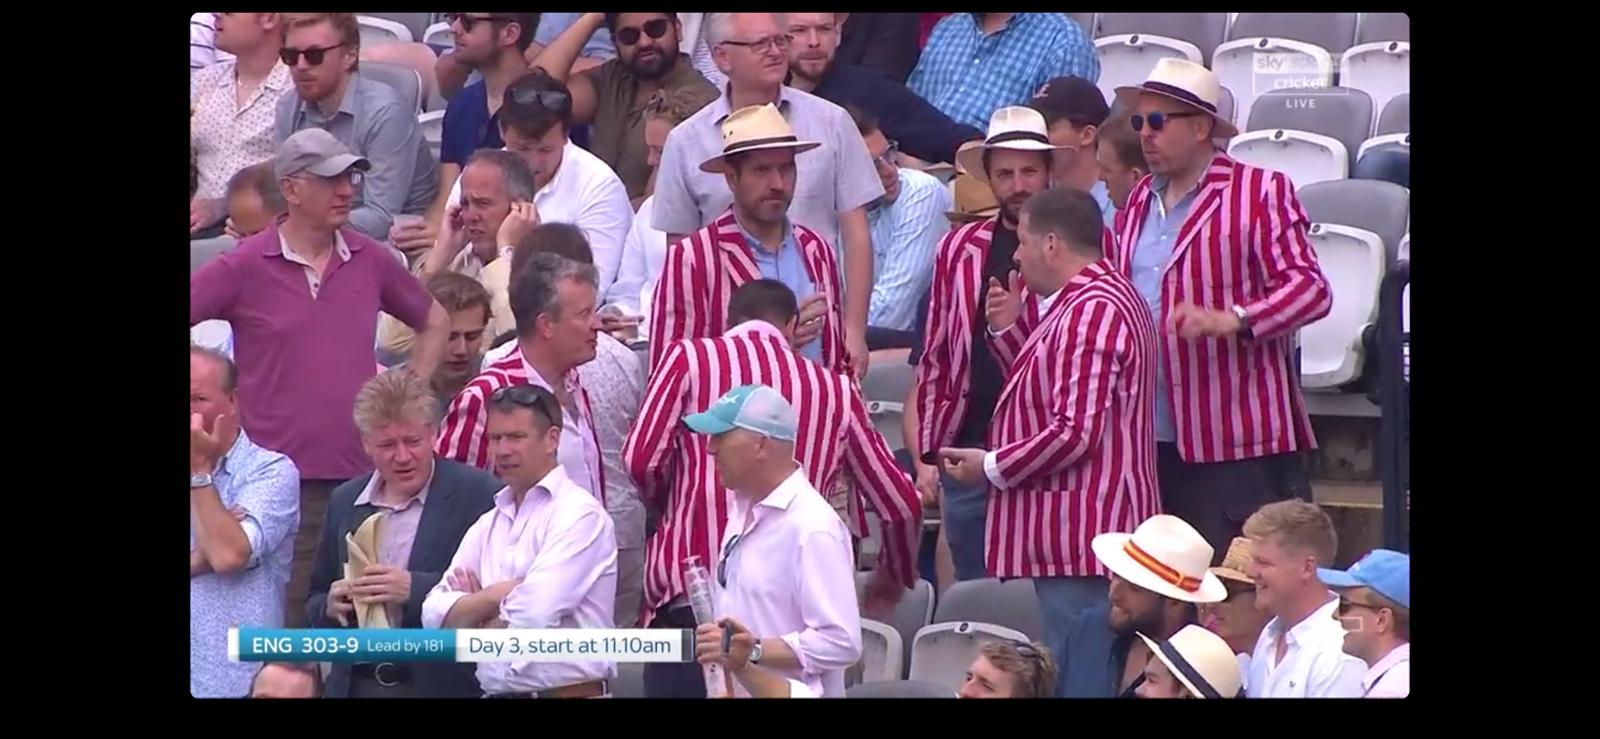 Vagabonds take their seats at Lords for Ireland Test Match 2019